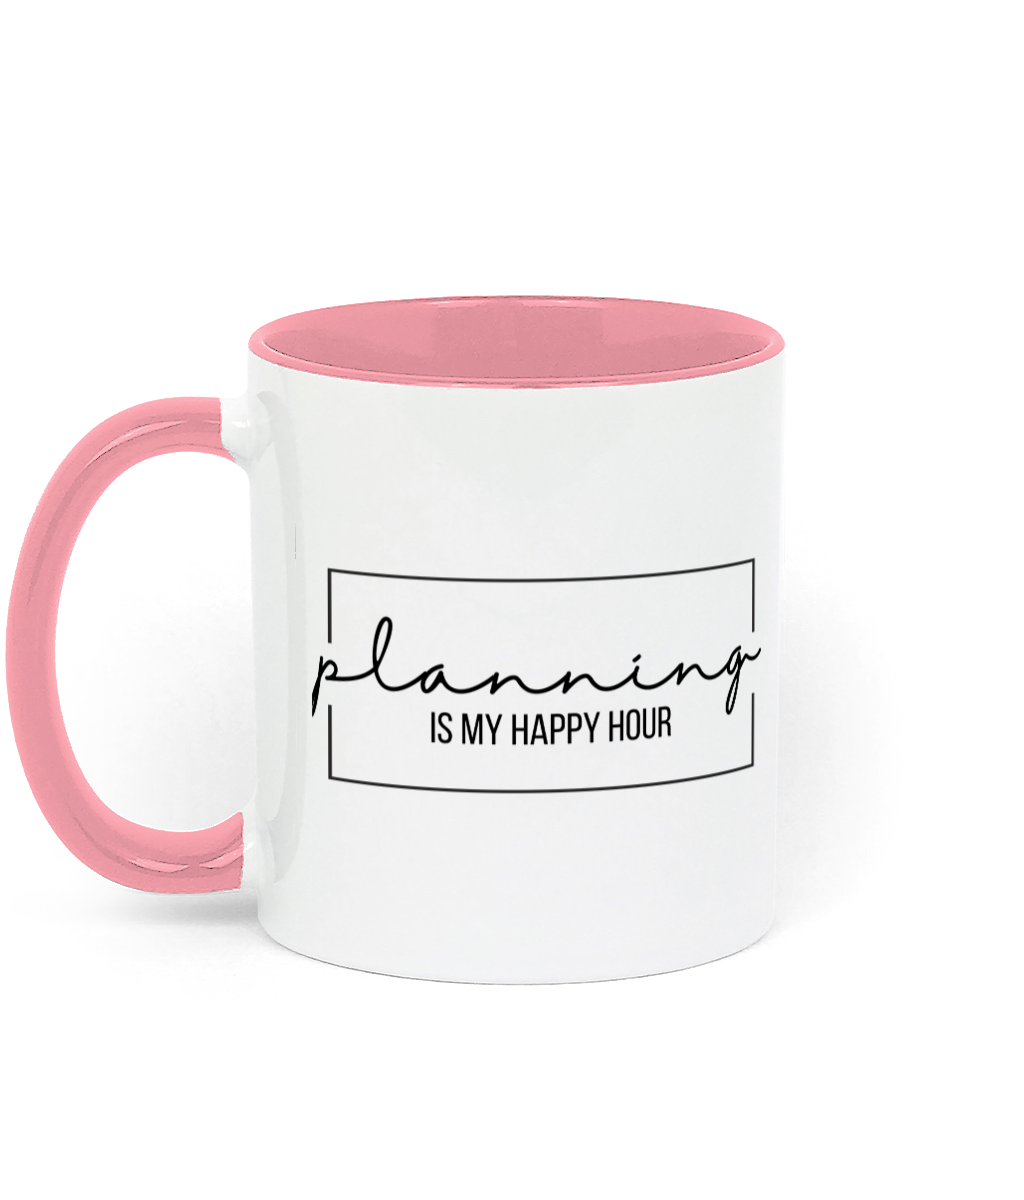 Planning is My Happy Hour 11 oz mug. Planning, Organisation, Productivity, Motivation, Inspiration, Empowering. Perfect Gift. Two-Toned. Pink.